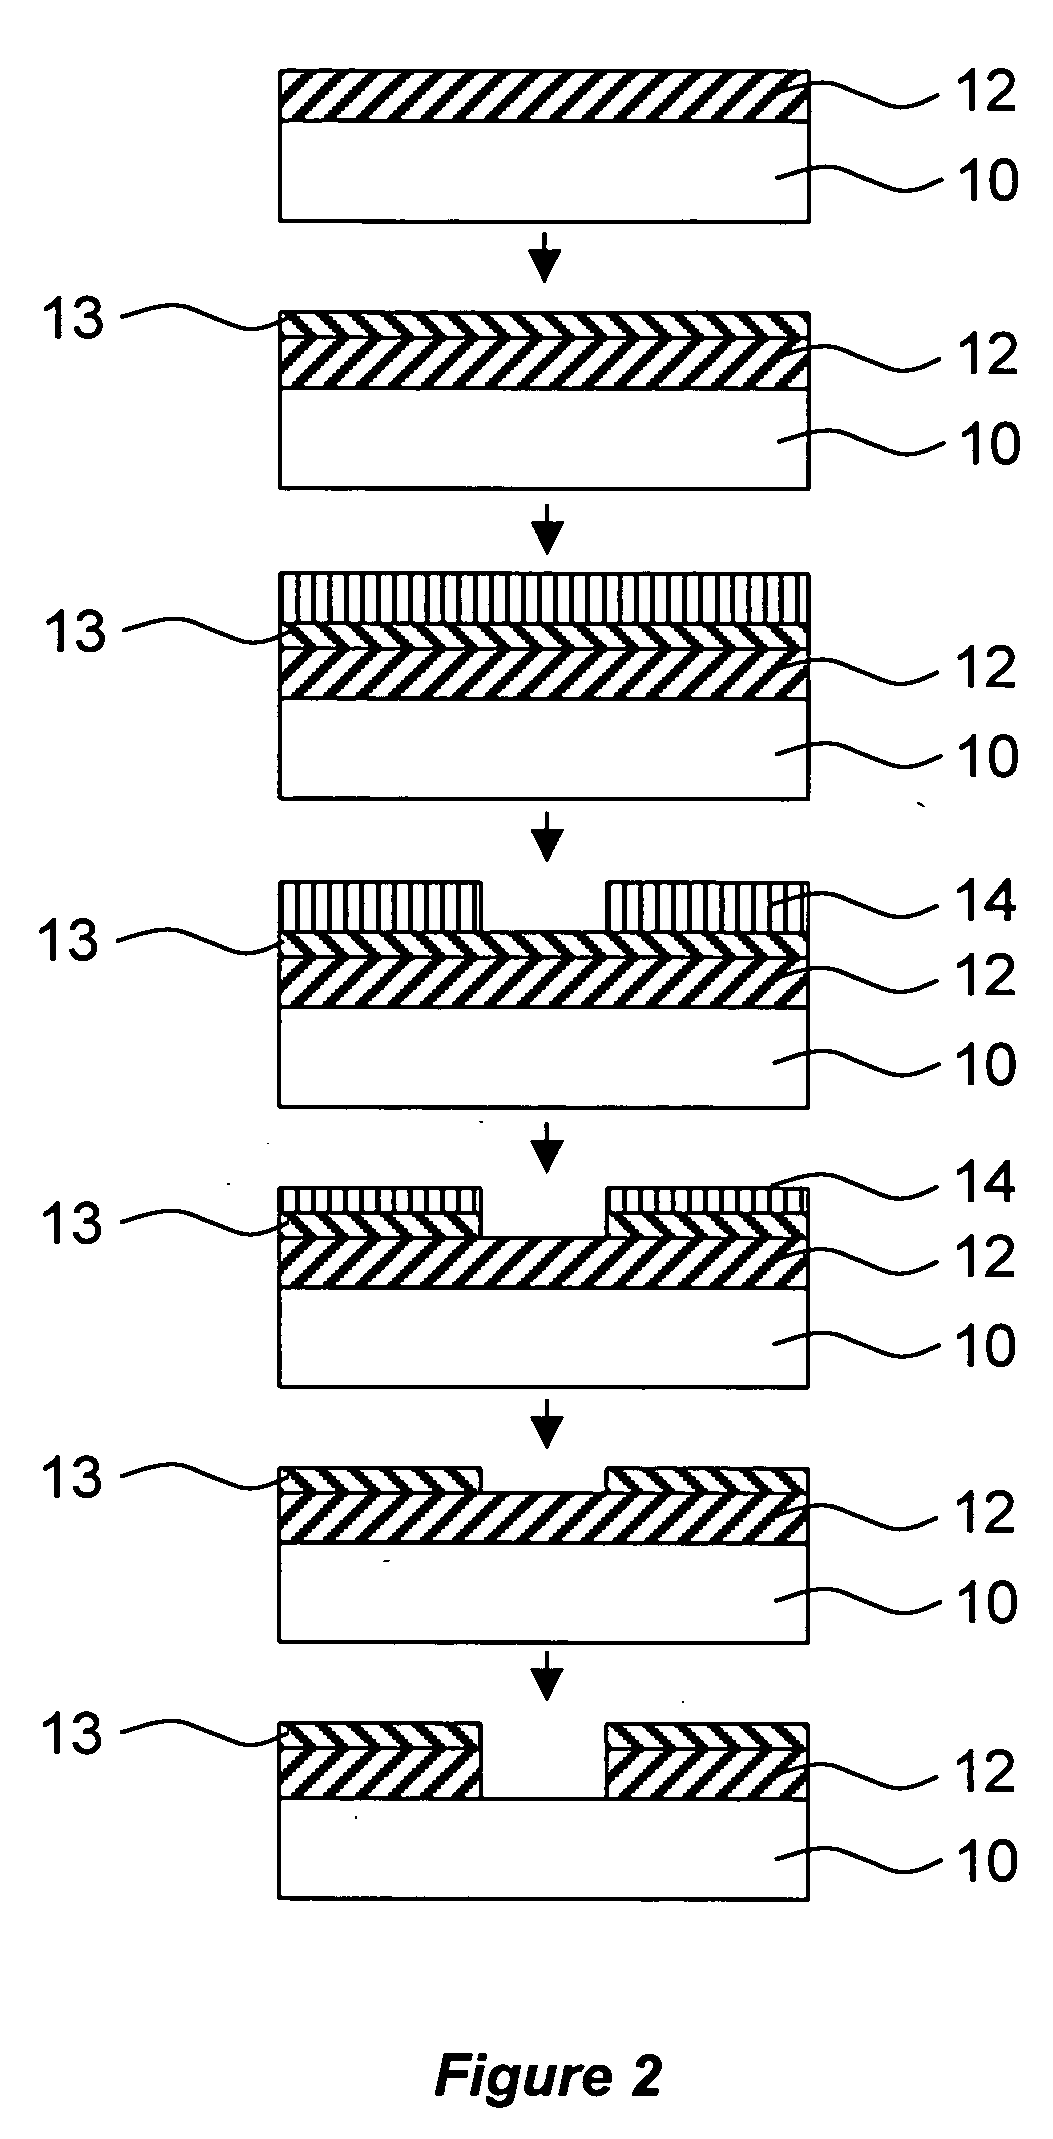 Dielectric materials and methods for integrated circuit applications